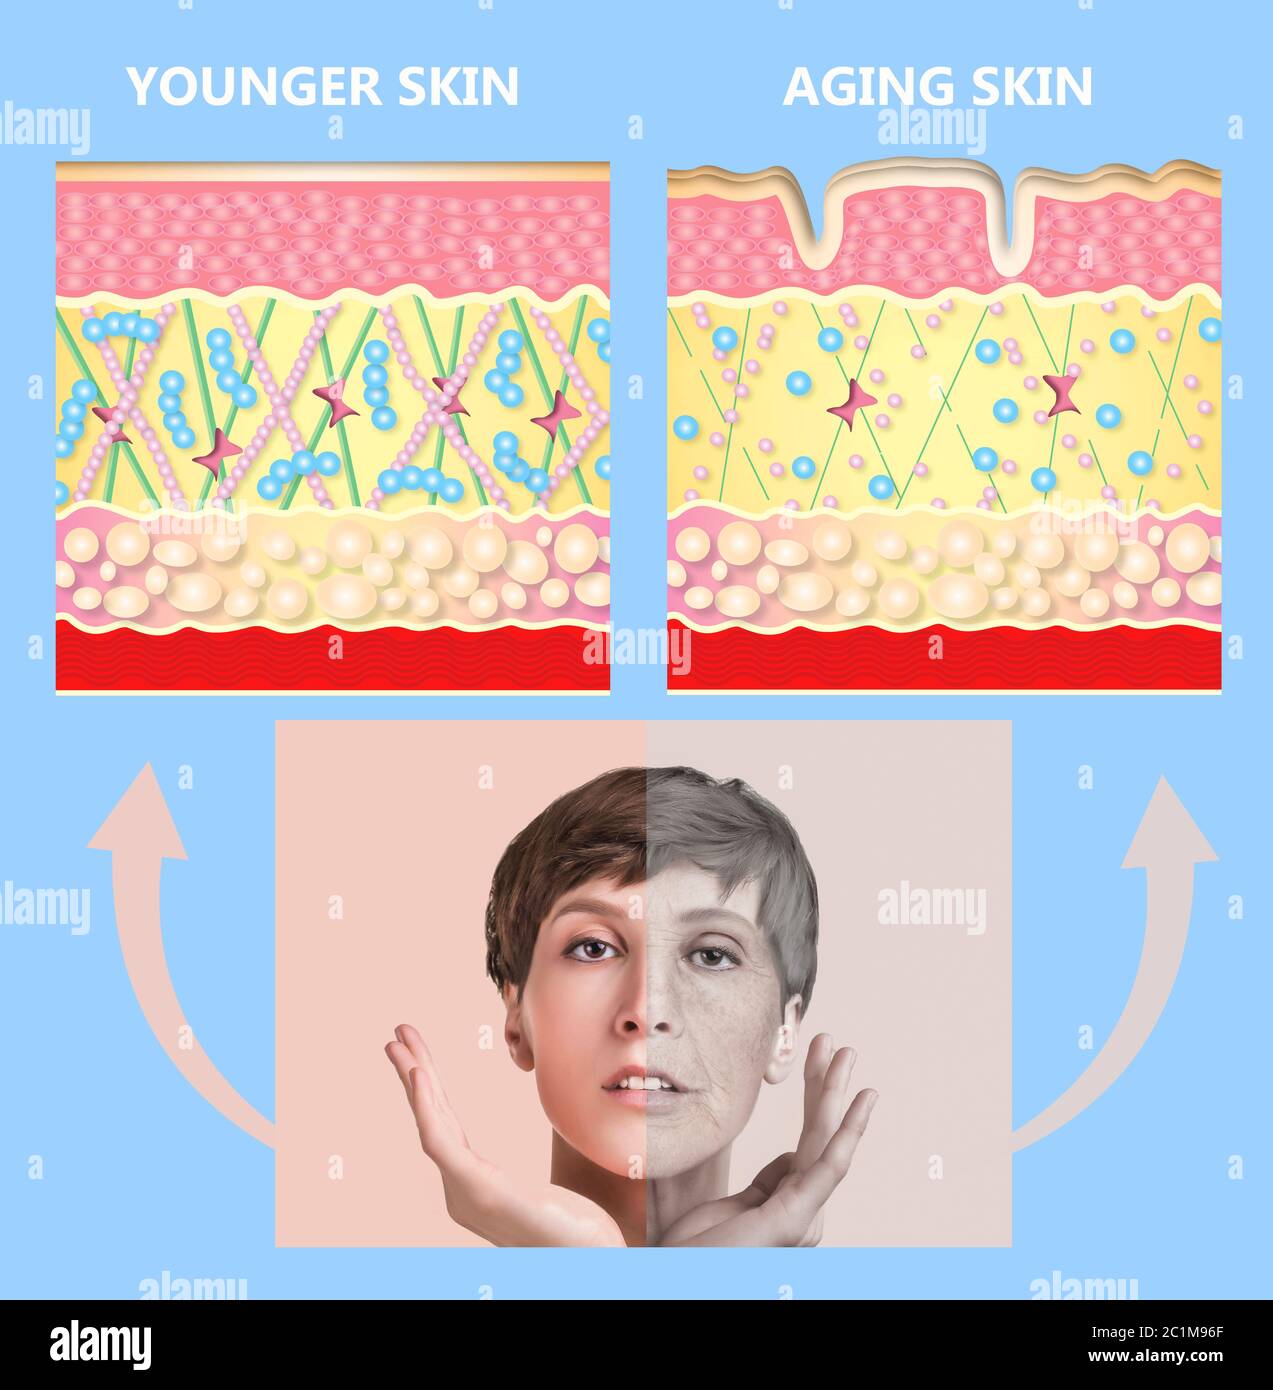 The younger skin and aging skin. elastin and collagen. A diagram of young and old face showing the decrease in collagen and broken elastin. Stock Photo